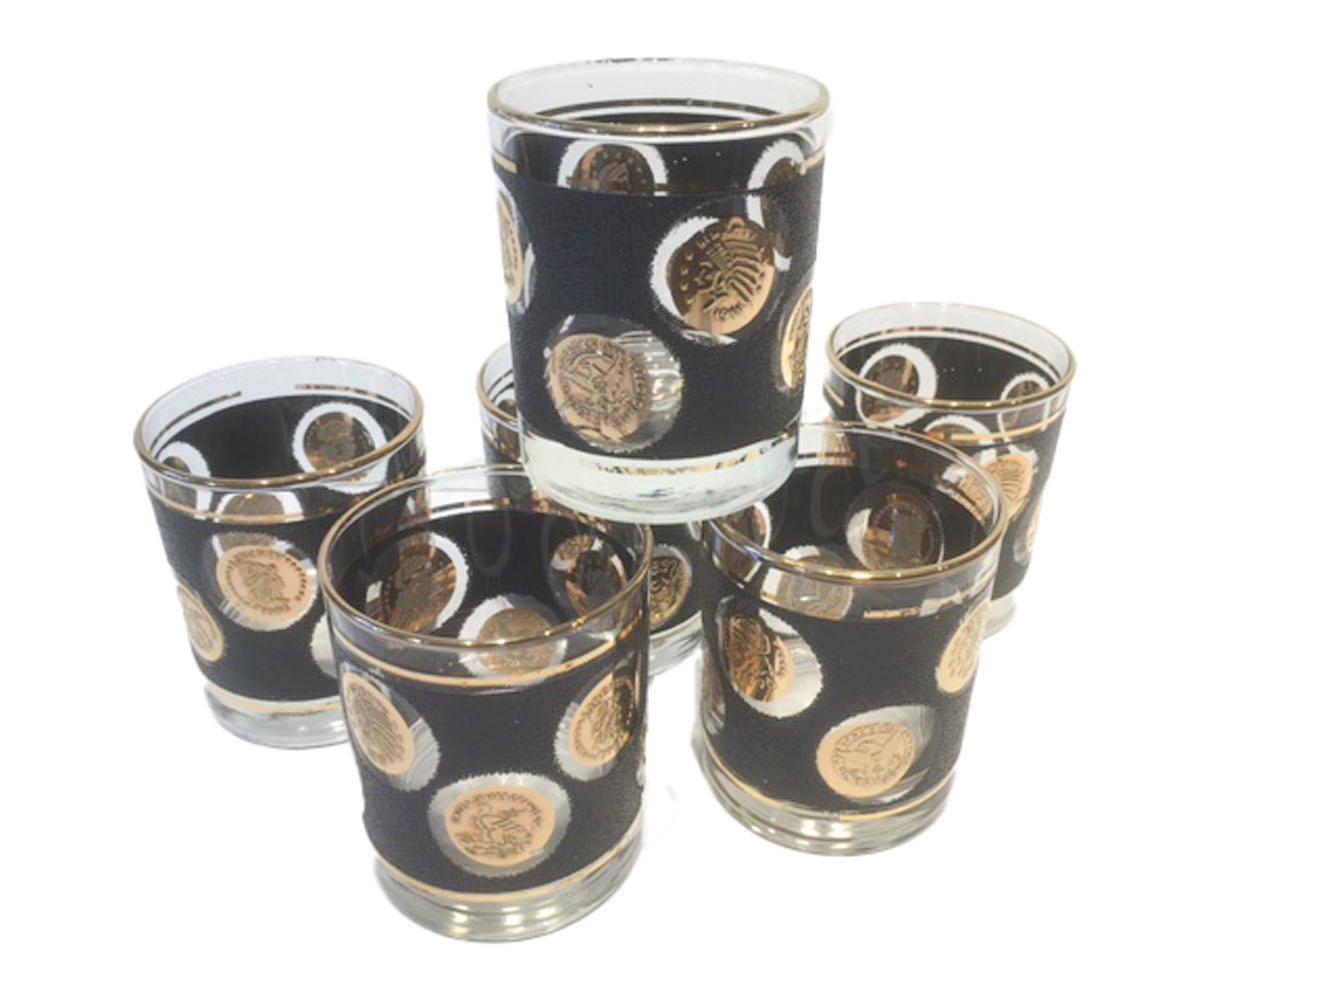 Vintage Libbey barware with gold coins against a pebbled black ground. Twelve piece set includes 6 highball glasses and 6 whiskey/rocks glasses.

Measures: 6 - Highball: 5